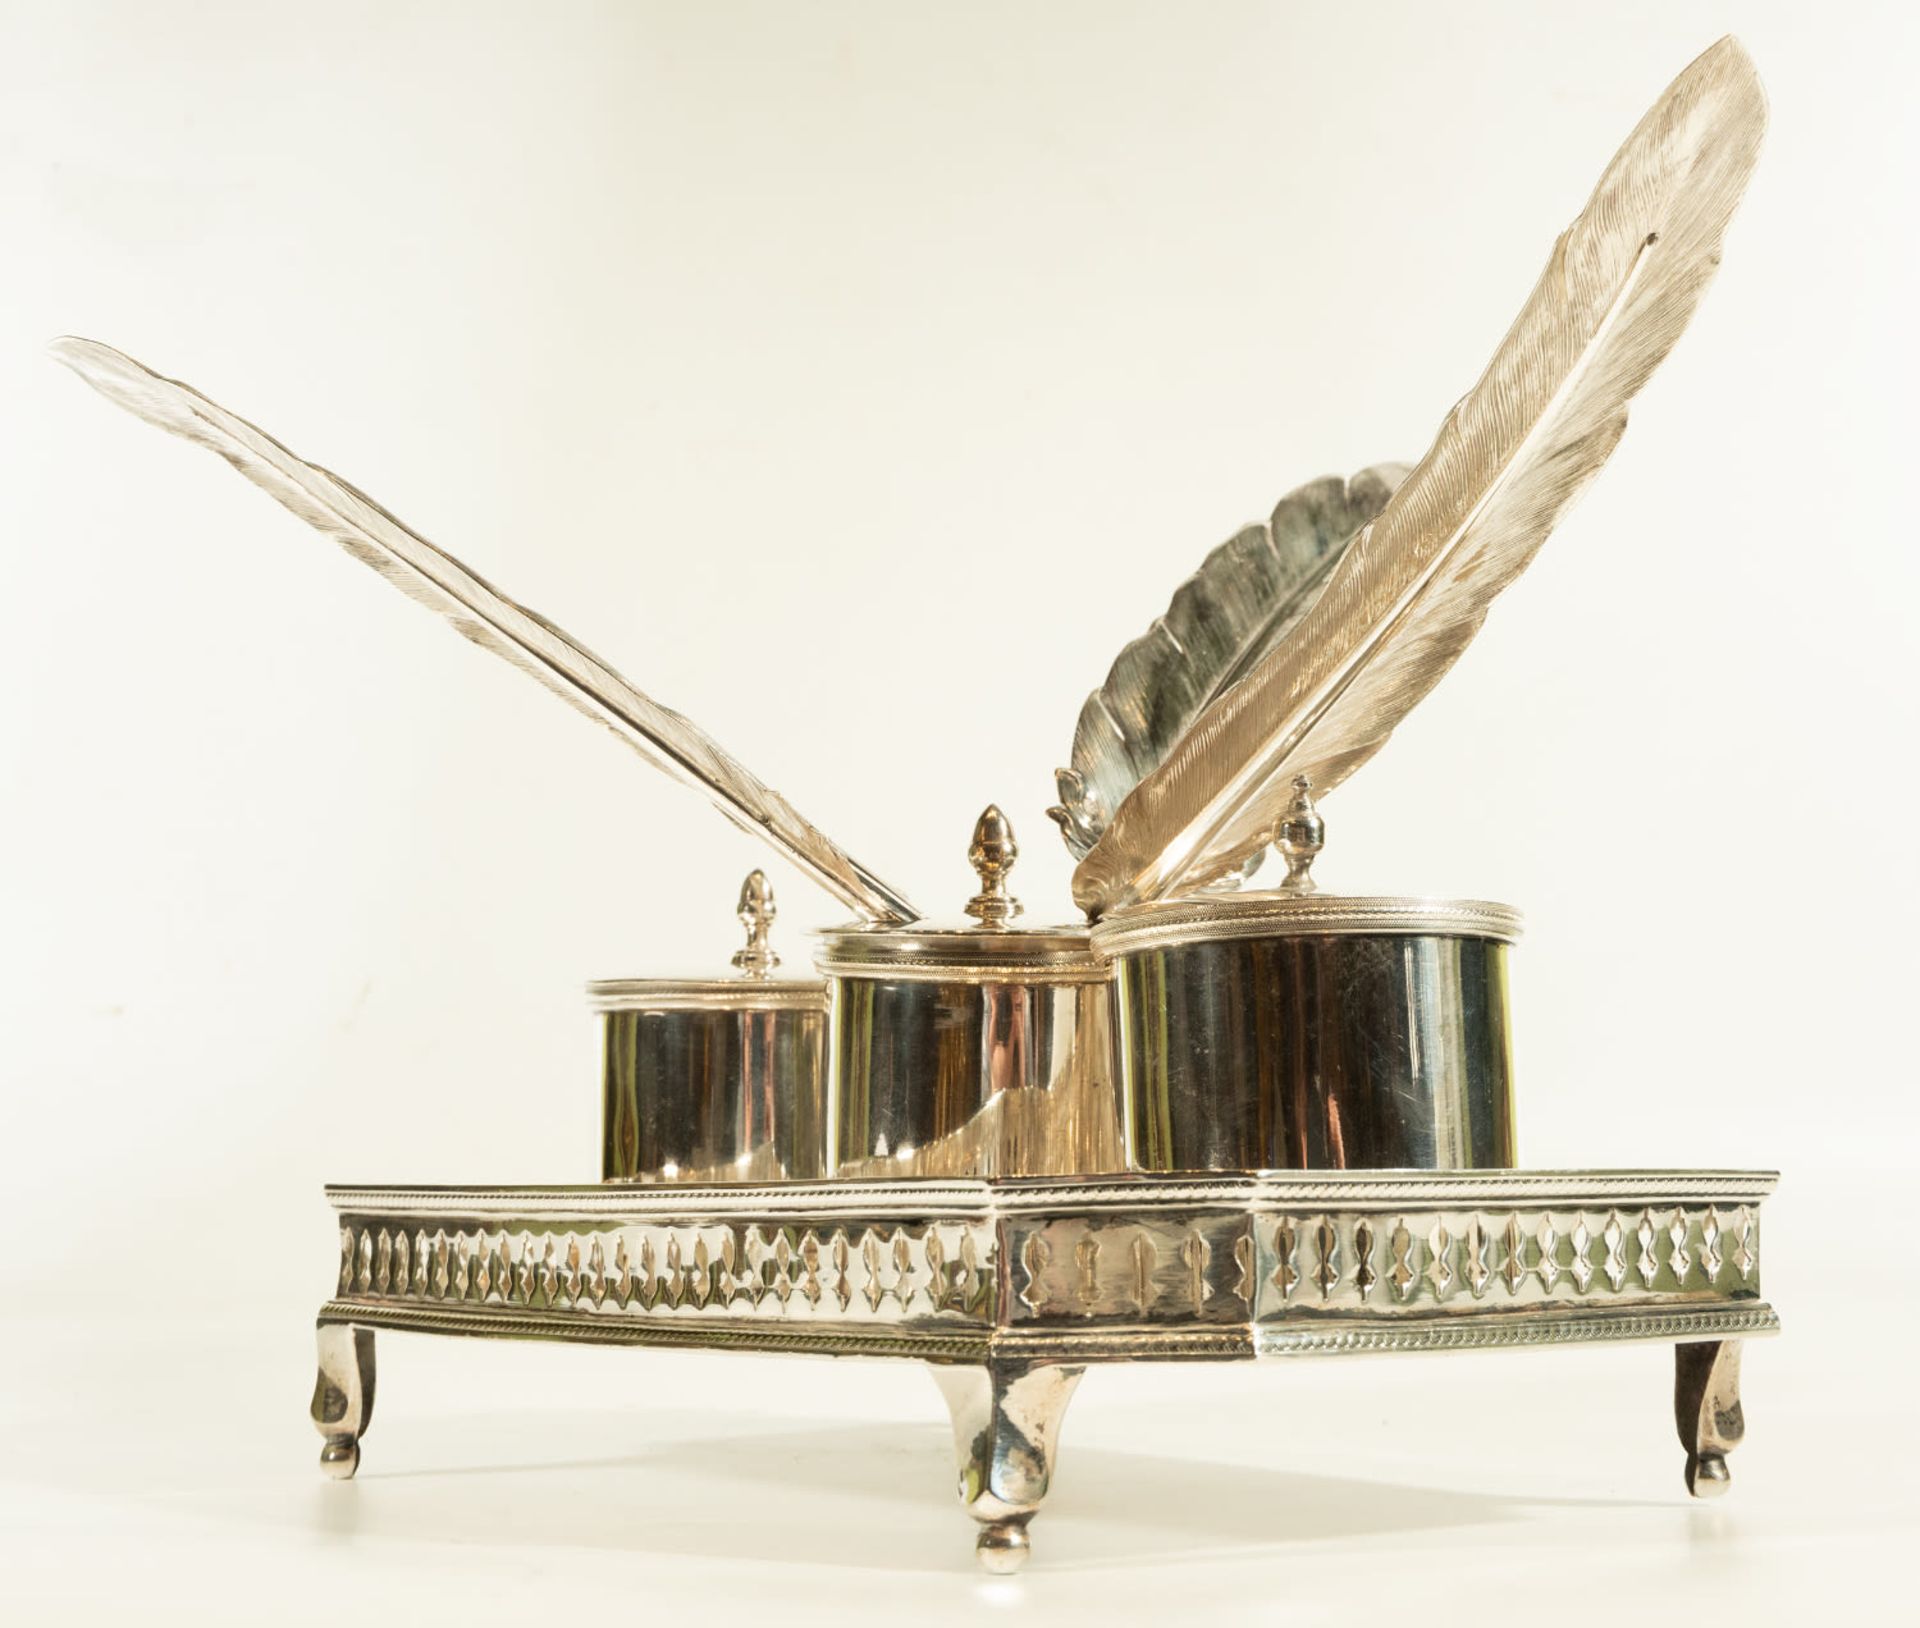 Writing Set with Silver Feathers, XIX century contrasts of Law on the base - Image 5 of 6